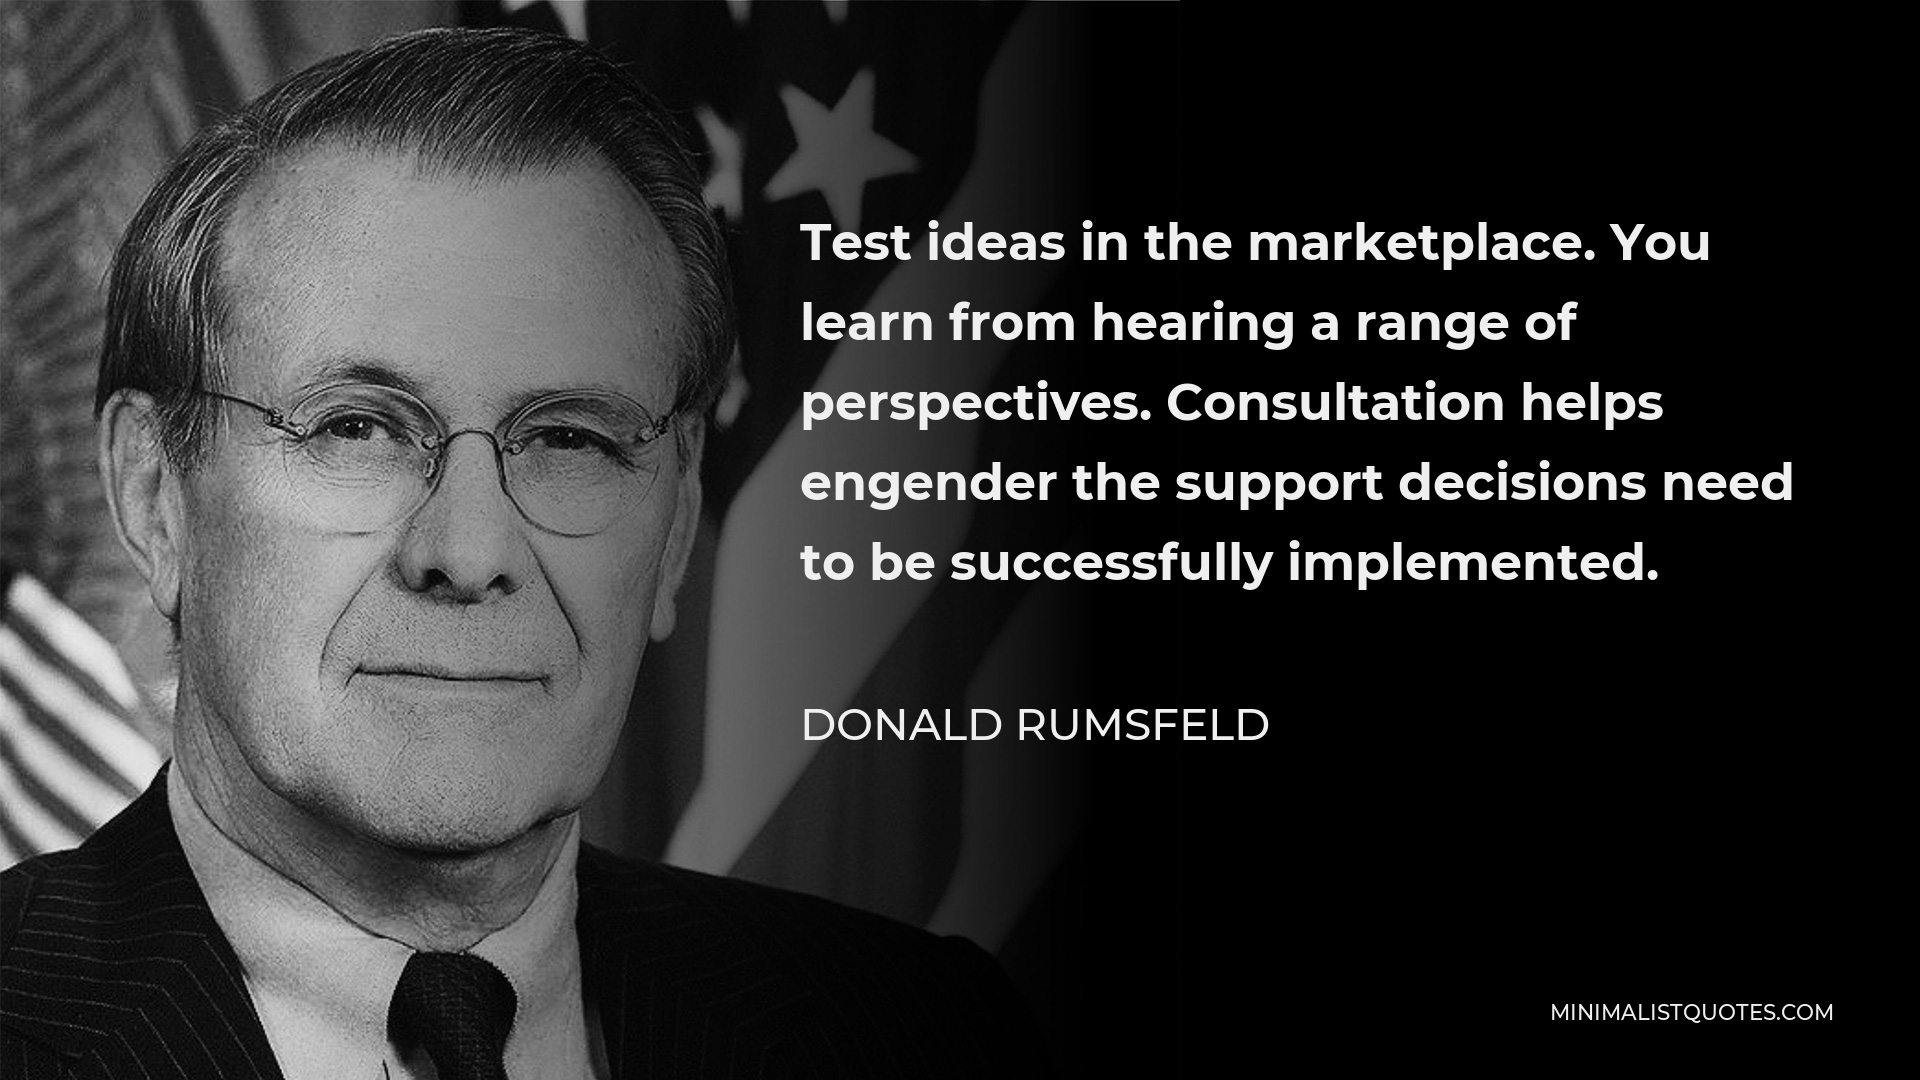 Donald Rumsfeld Quote - Test ideas in the marketplace. You learn from hearing a range of perspectives. Consultation helps engender the support decisions need to be successfully implemented.